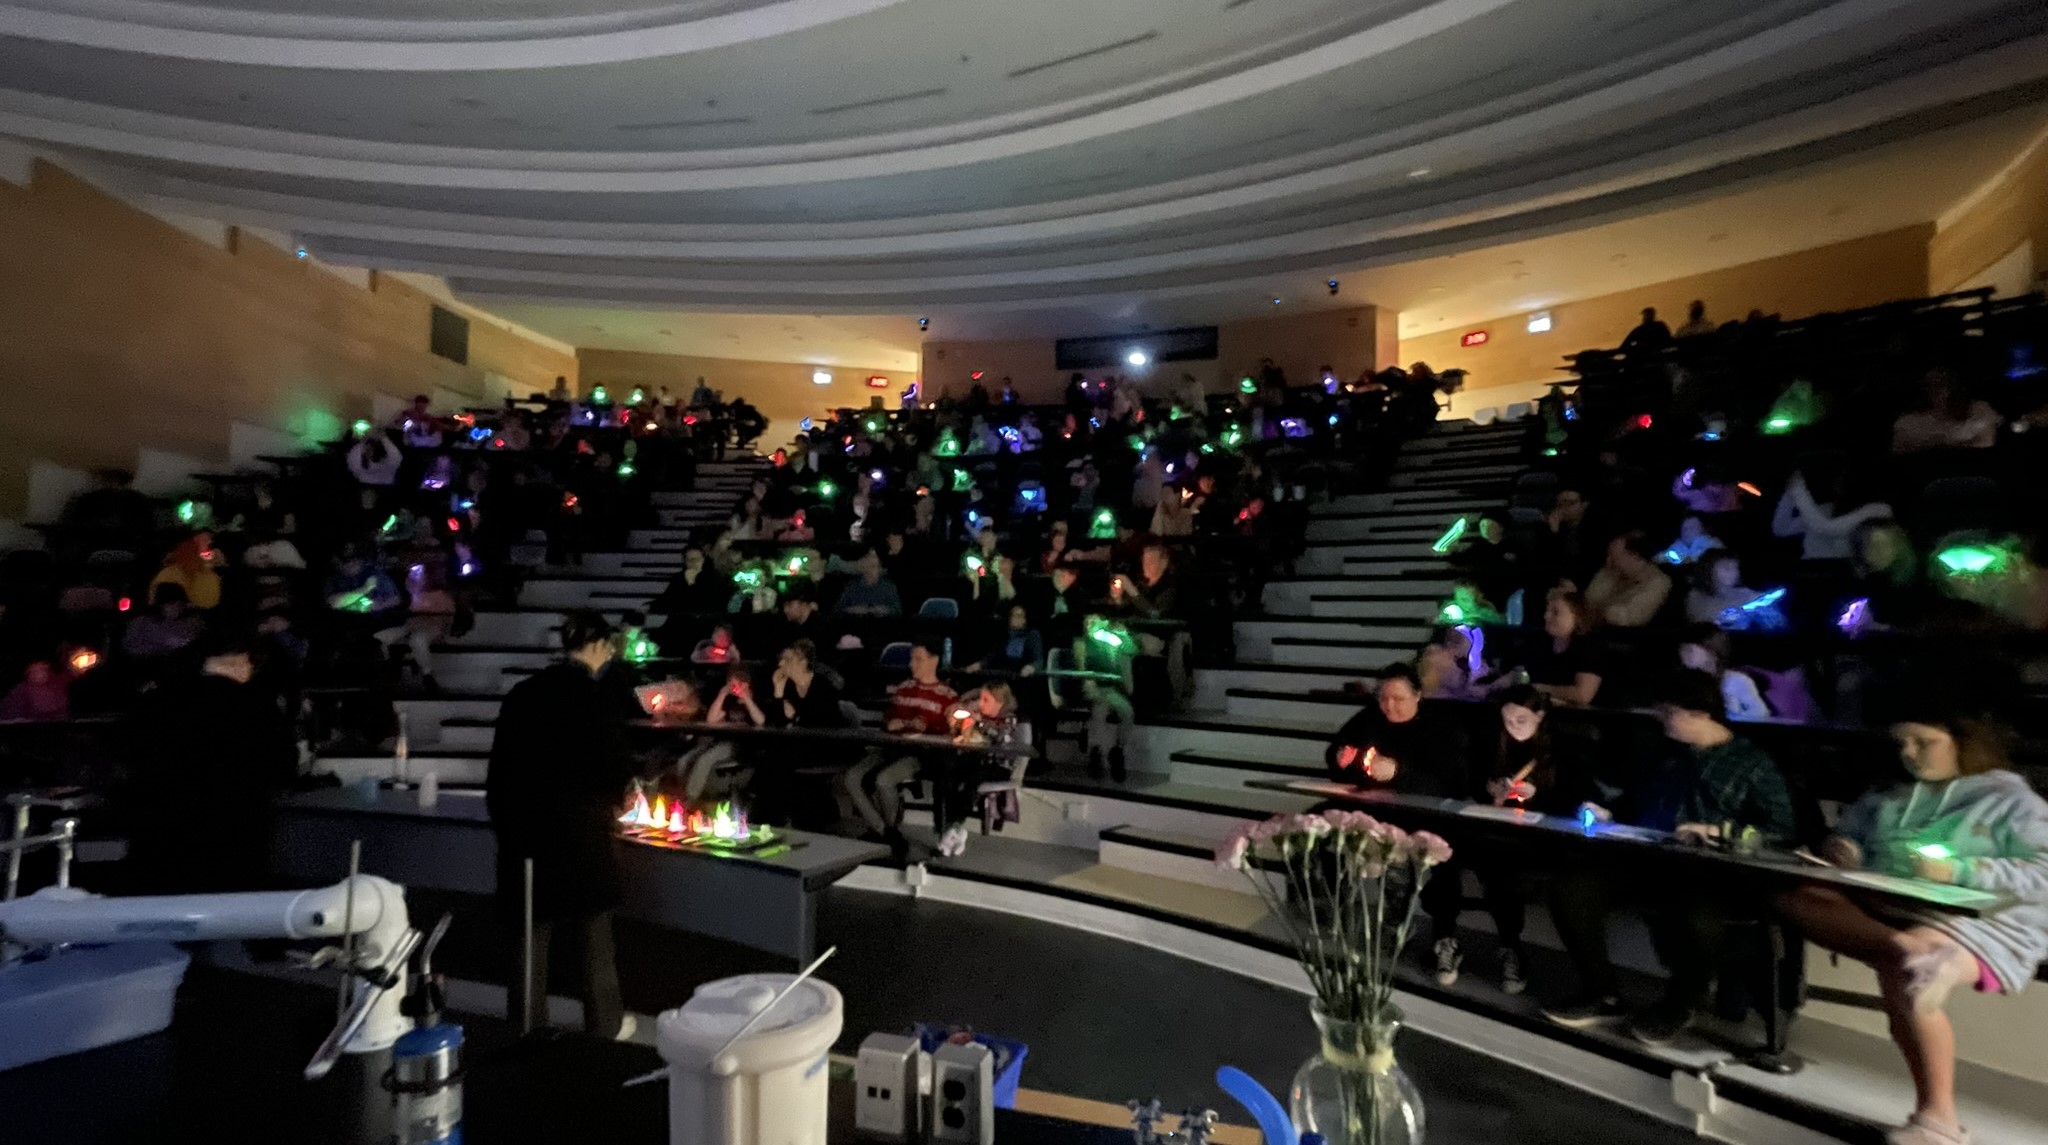 Image of seated audience with glowsticks while student performs flaming bowls chemistry experiment